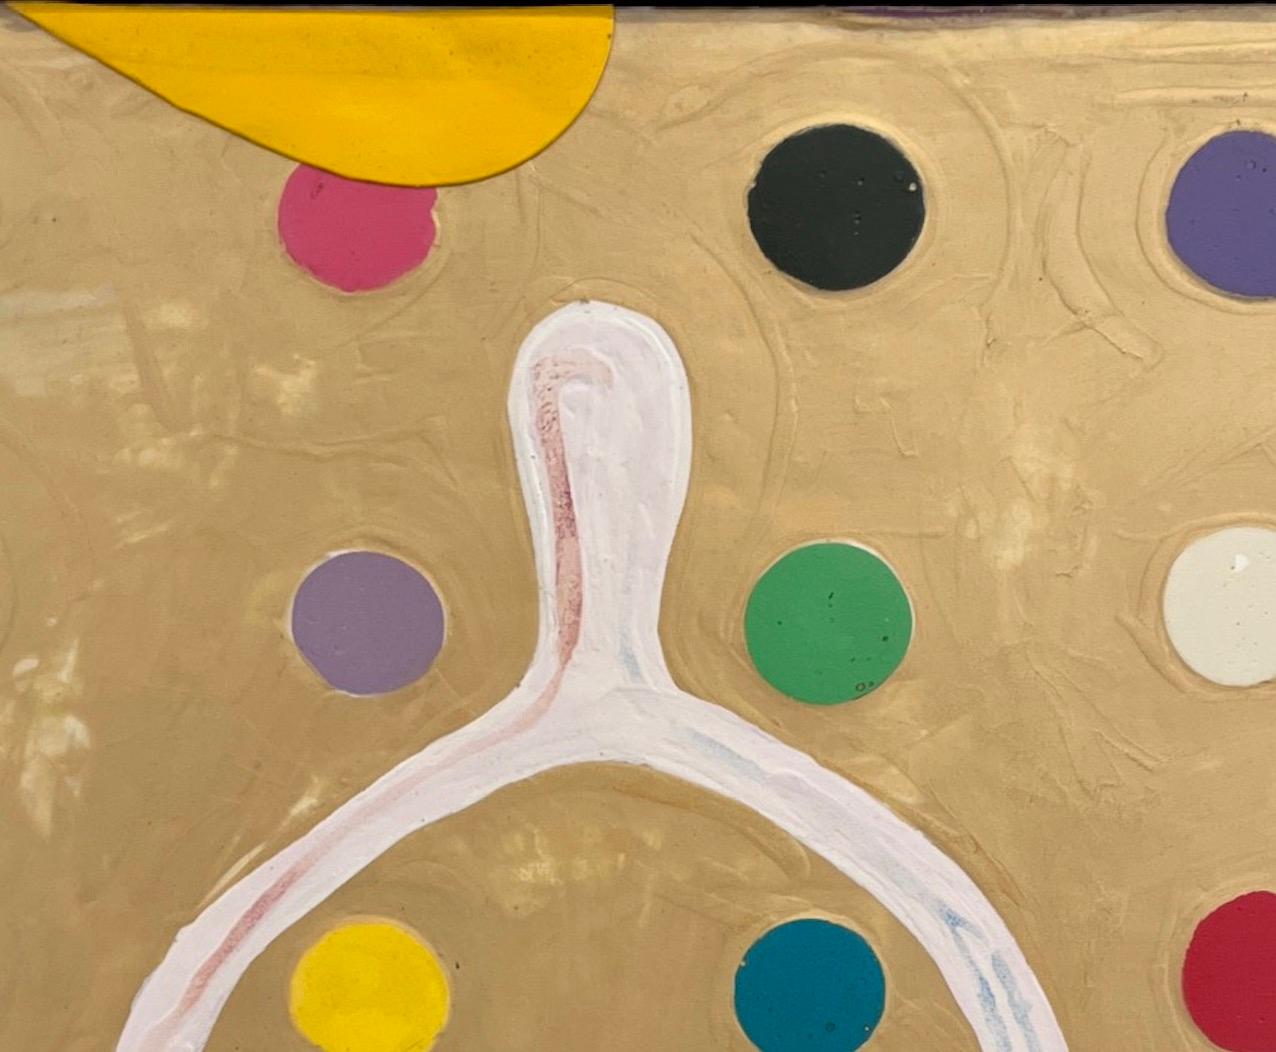 John Randall Nelson’s paintings are layered with his own personal language consisting of patterns, symbols, and archetypes that may not make any literal sense but play on subconscious associations. His paintings are thick with paint, poured pigment,